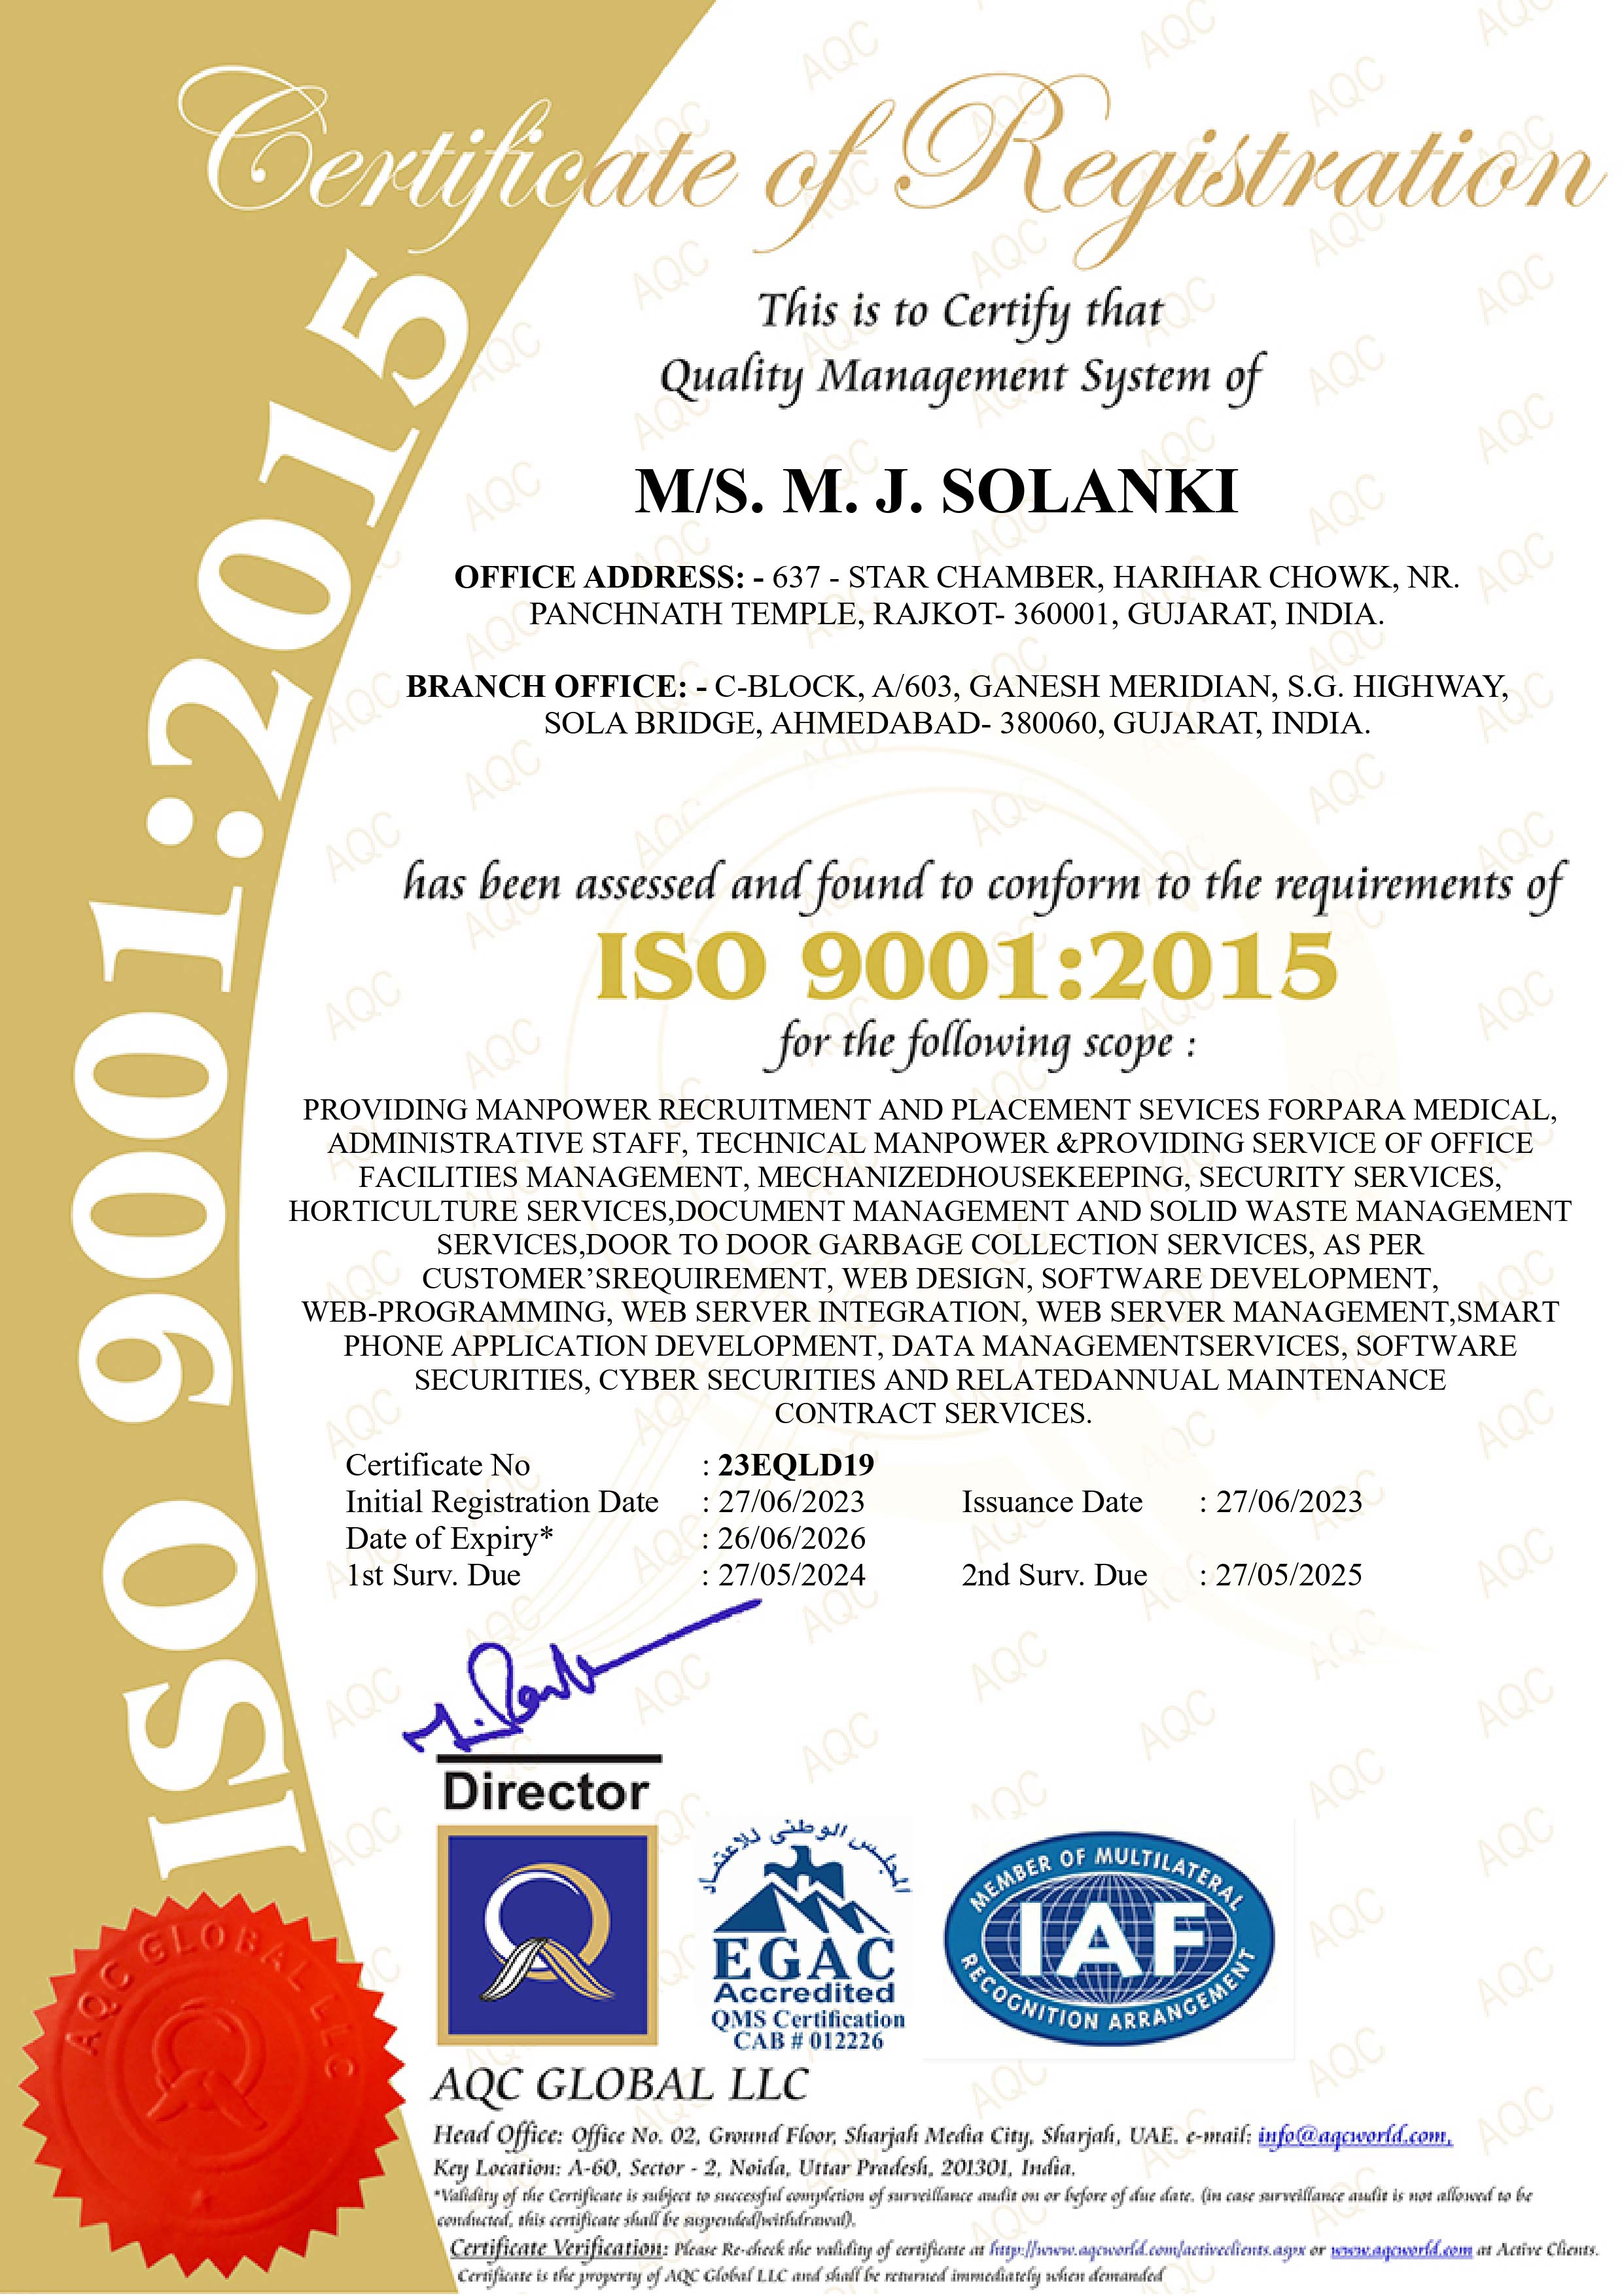 Quality Management System Certificate Image